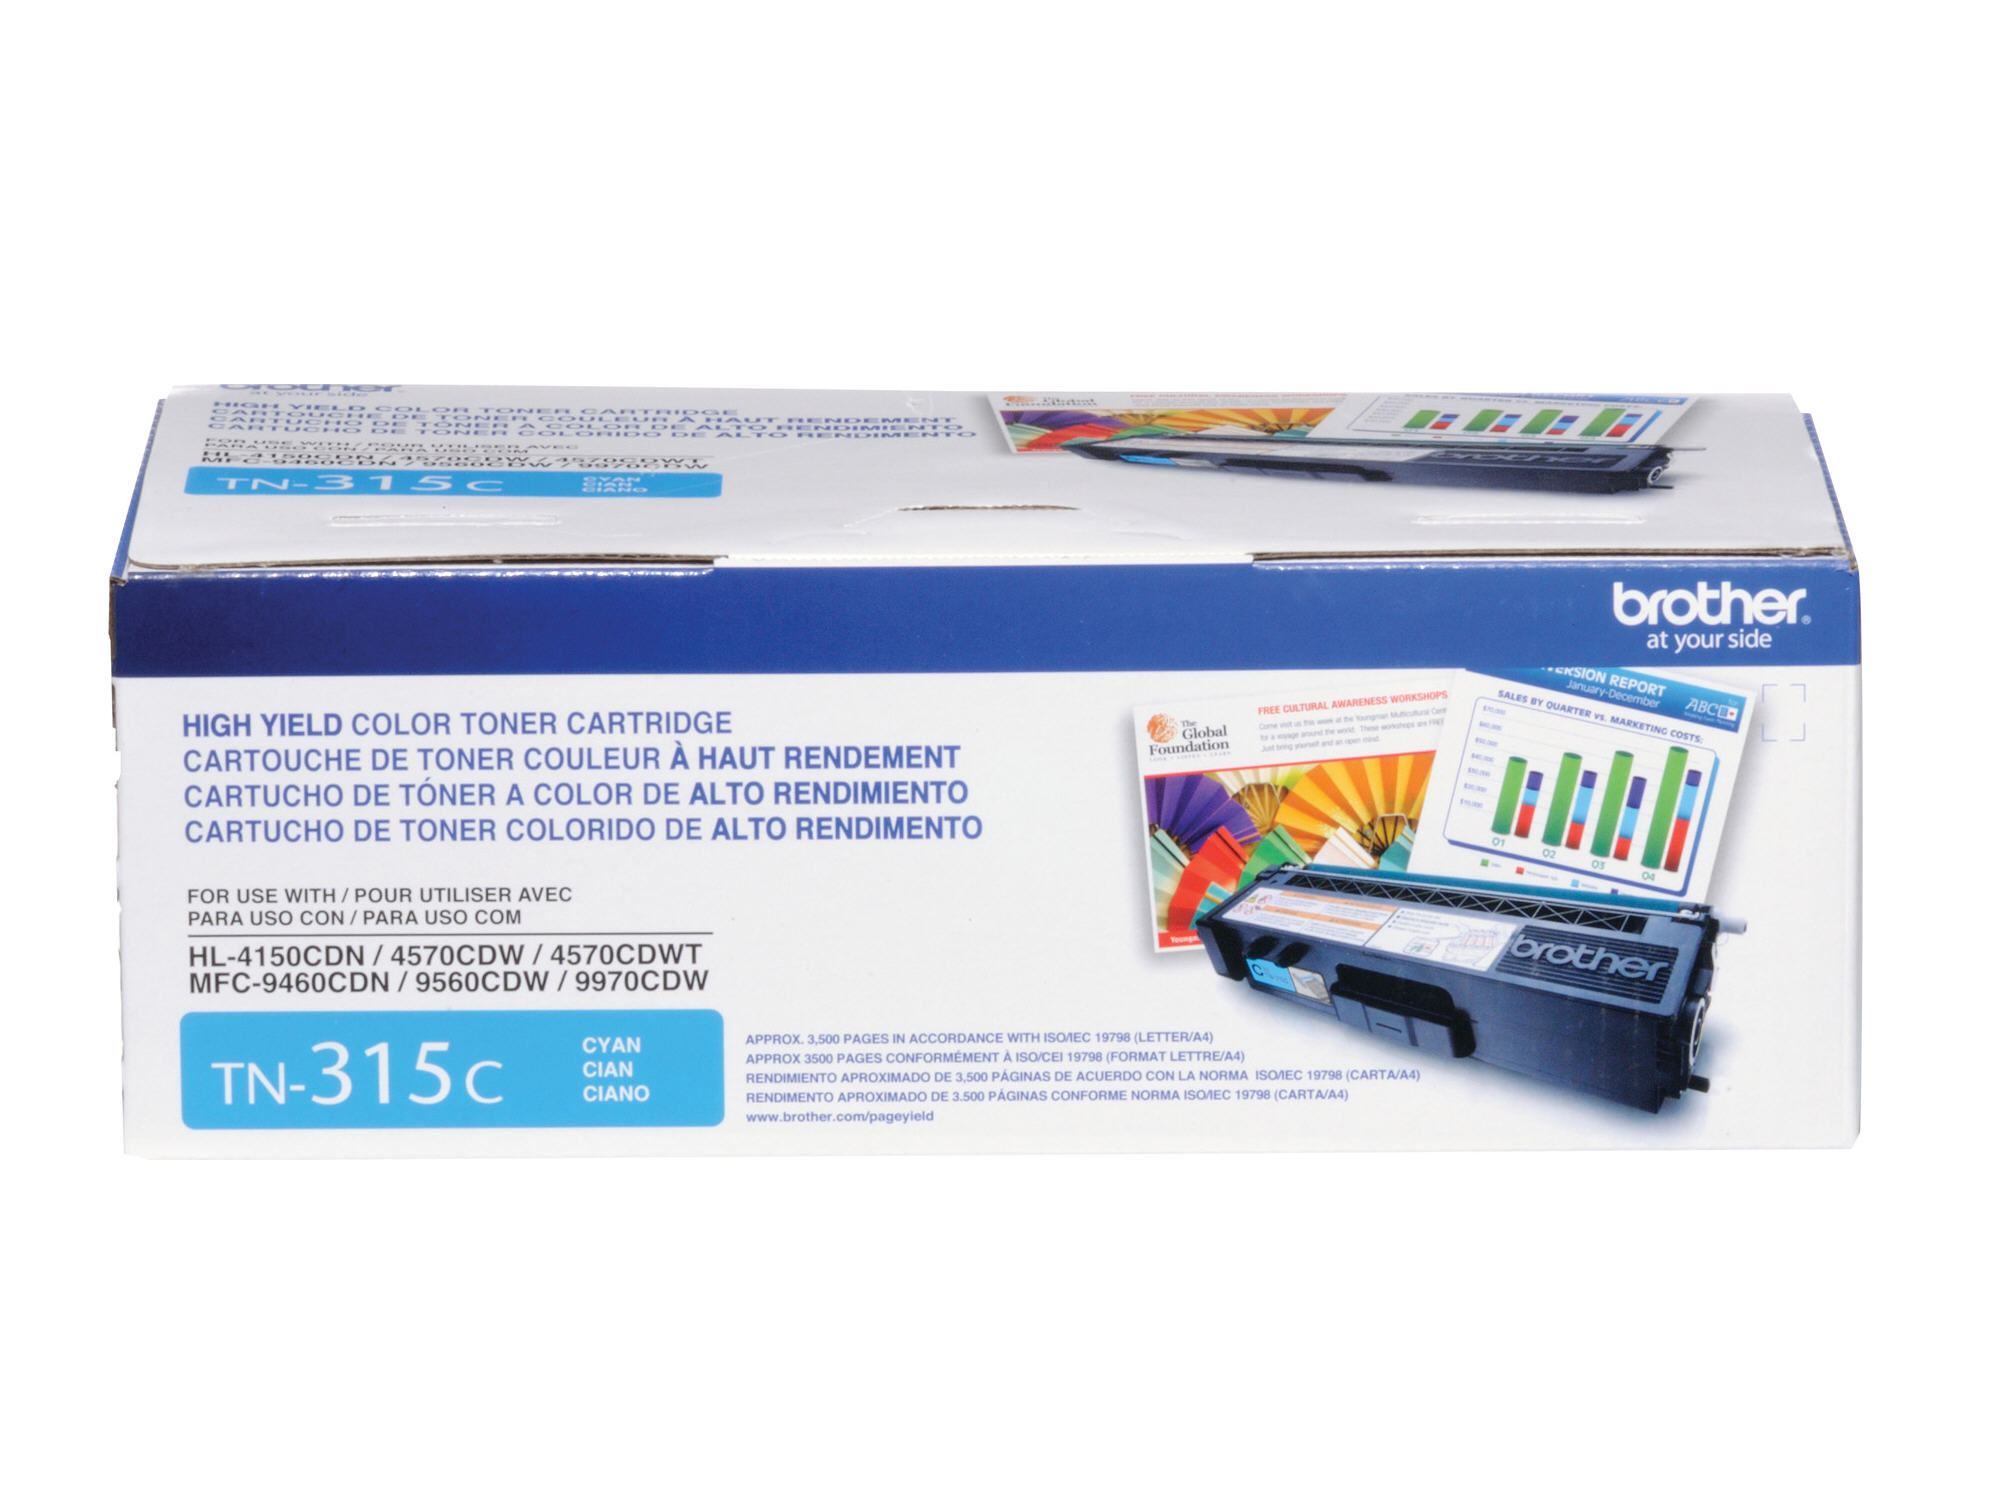 TN315C HIGH YIELD TONER CART CYAN High Yield Cyan Toner Cartridge (yields approx. 3,500 pages in accordance with ISO/IEC 19798 on letter/A4 size paper) CYAN HIGH YIELD TONER FOR HL4150CDN HL4570CDW HL4570CDWT